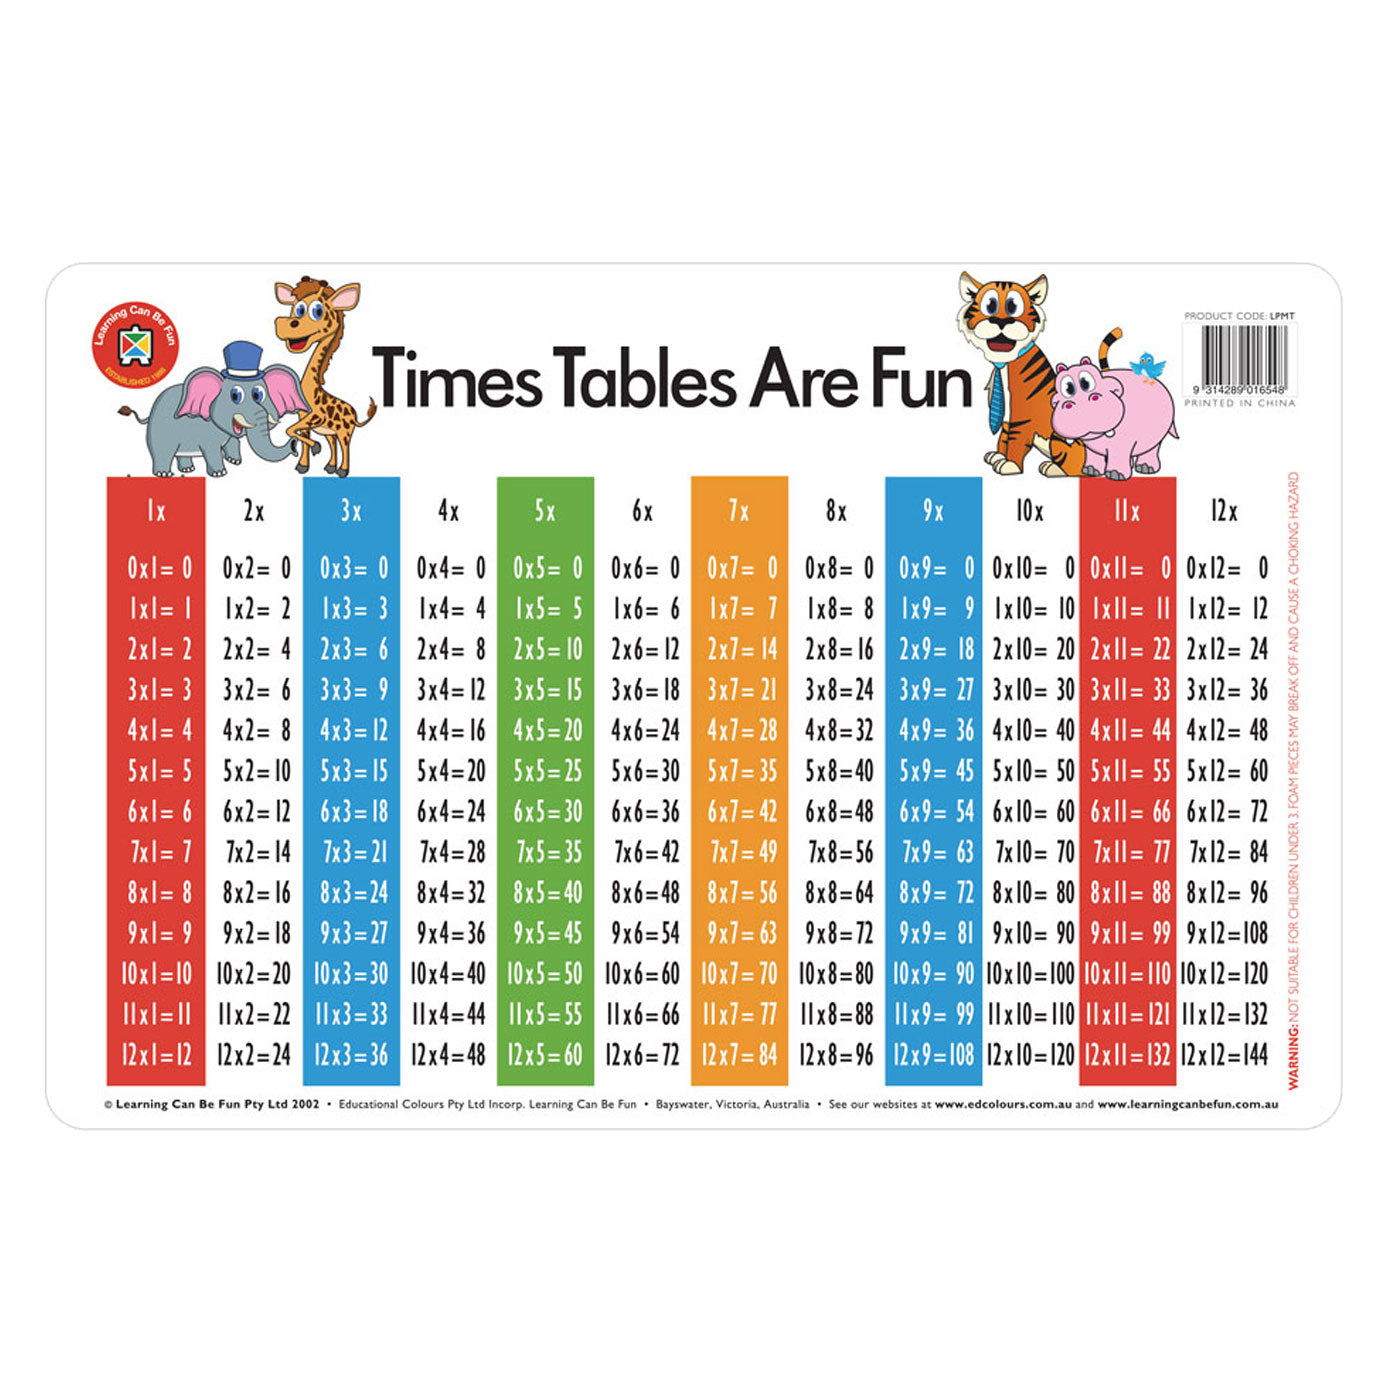 LCBF Placemat Educational Desk Mat 44 x 29 cm Times Tables are Fun